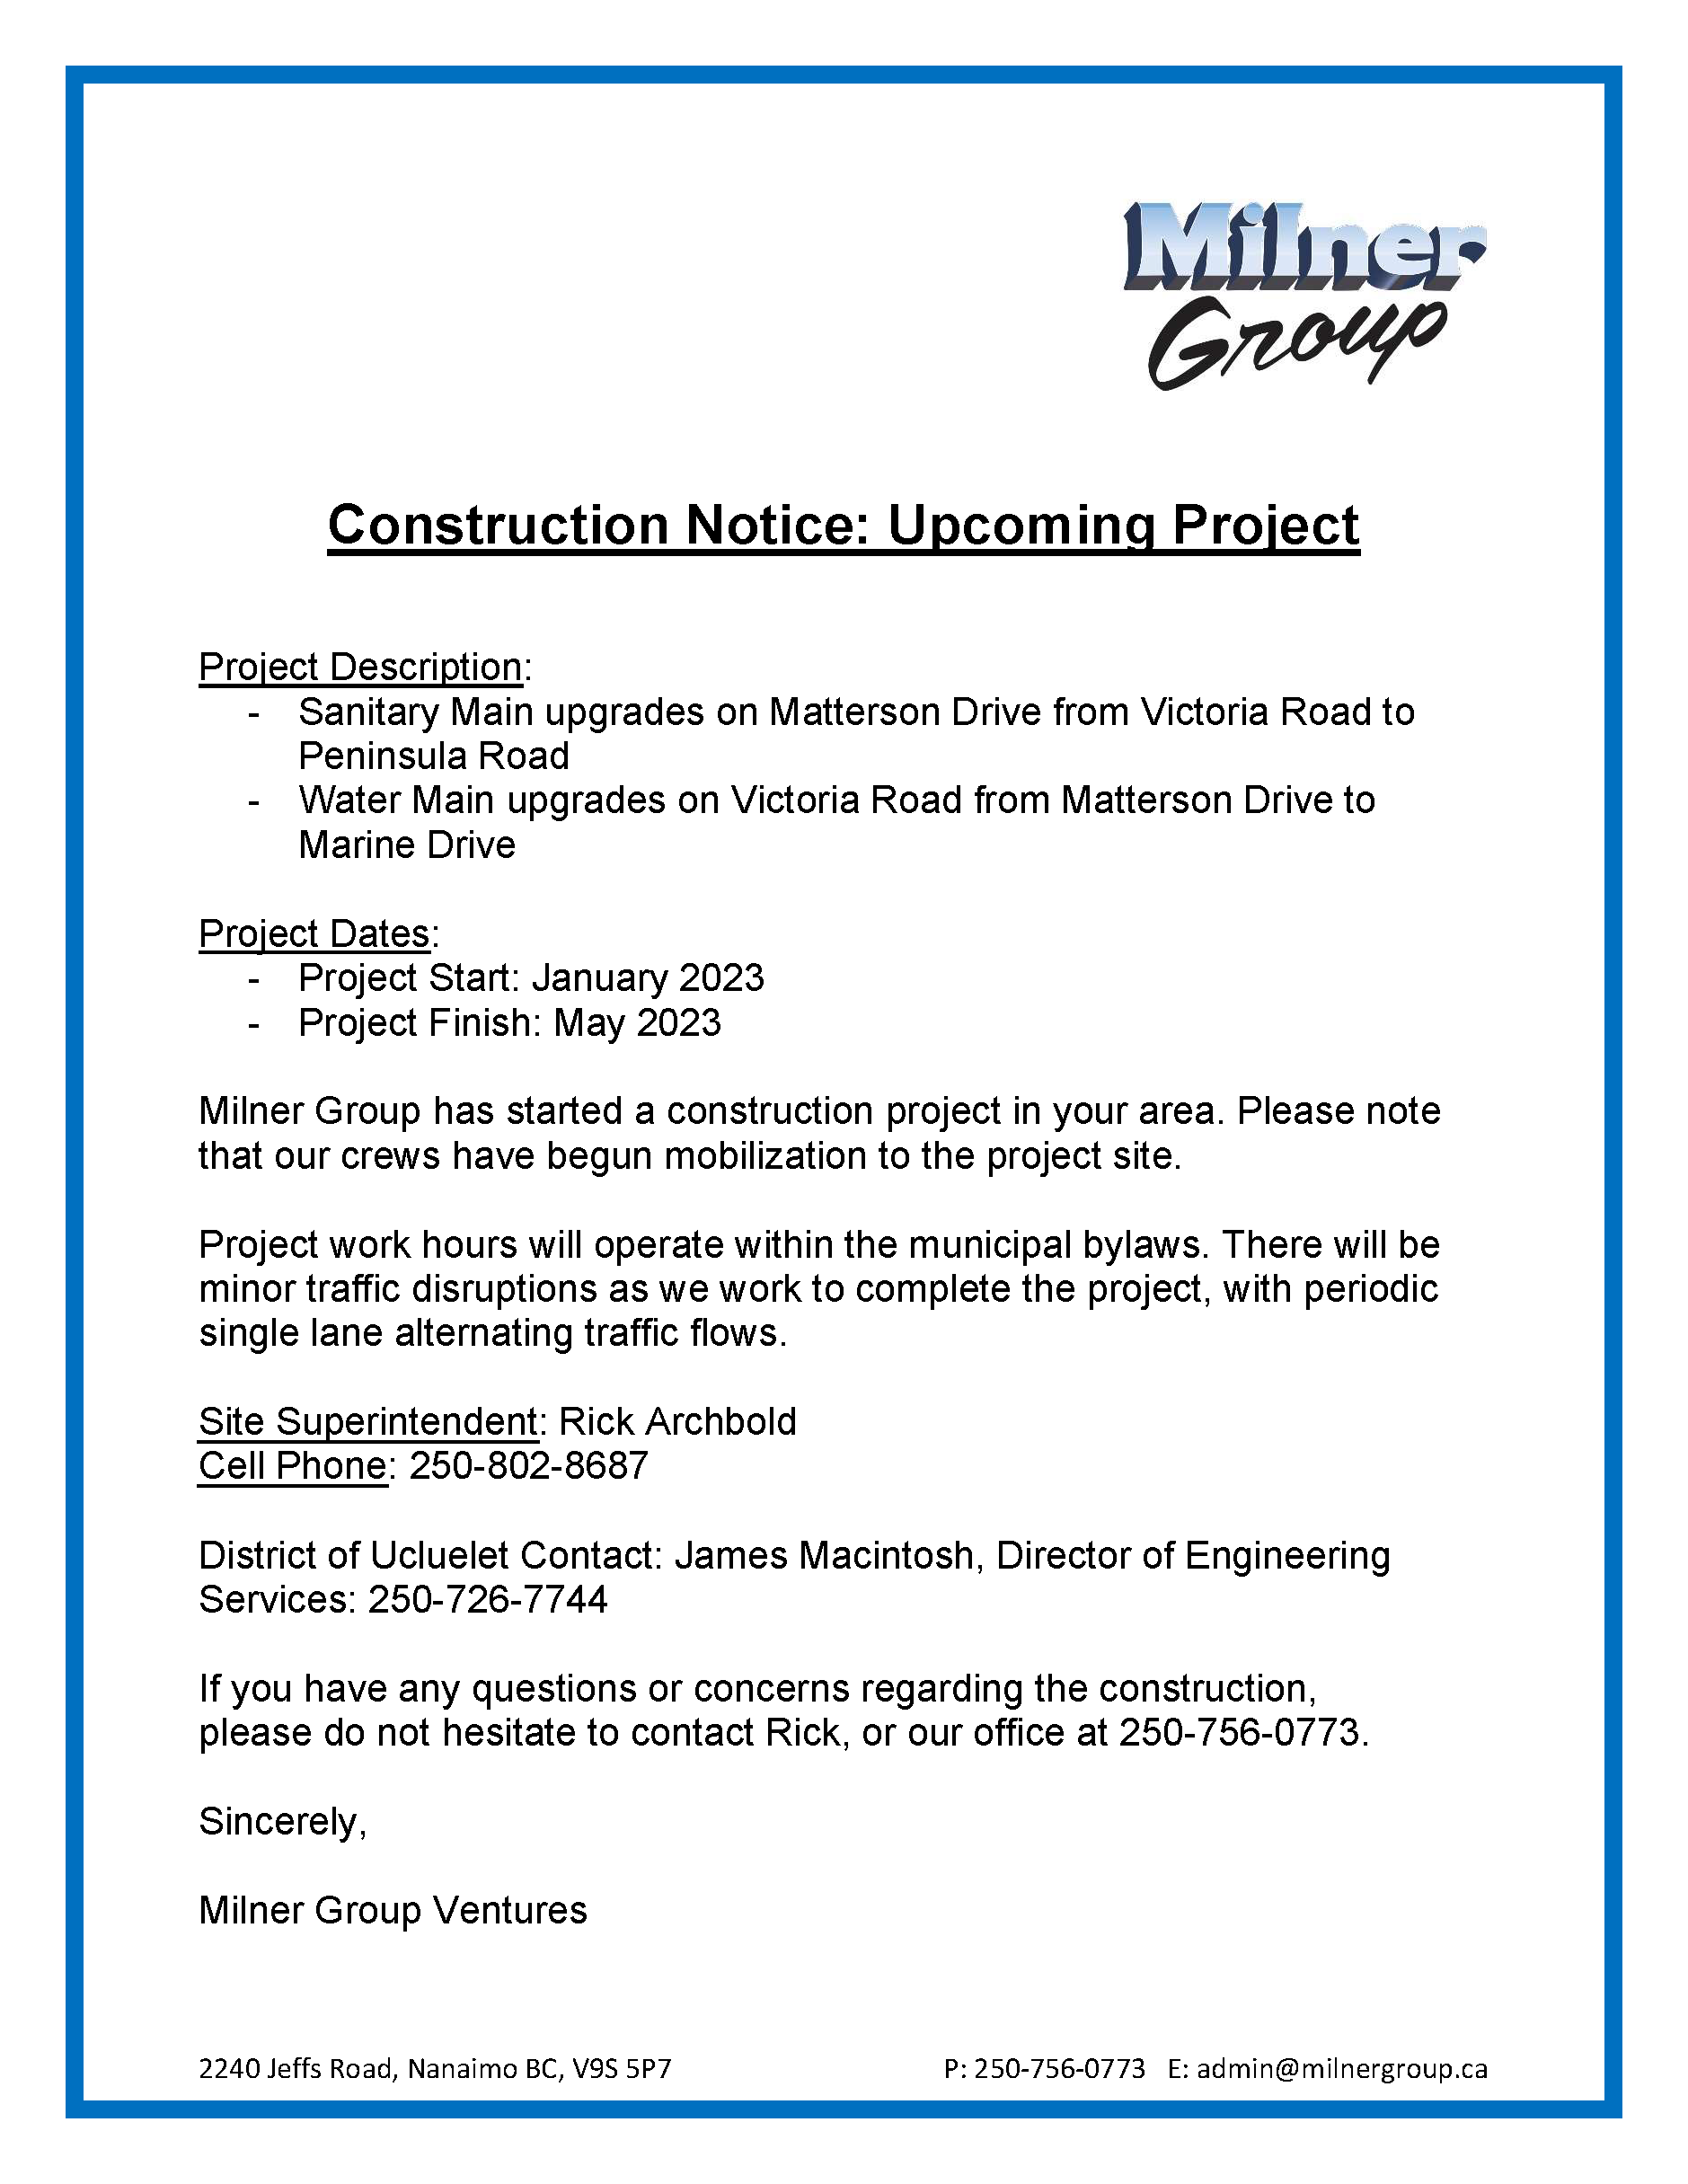 Construction Notice to Residents Ucluelet LOT 16 